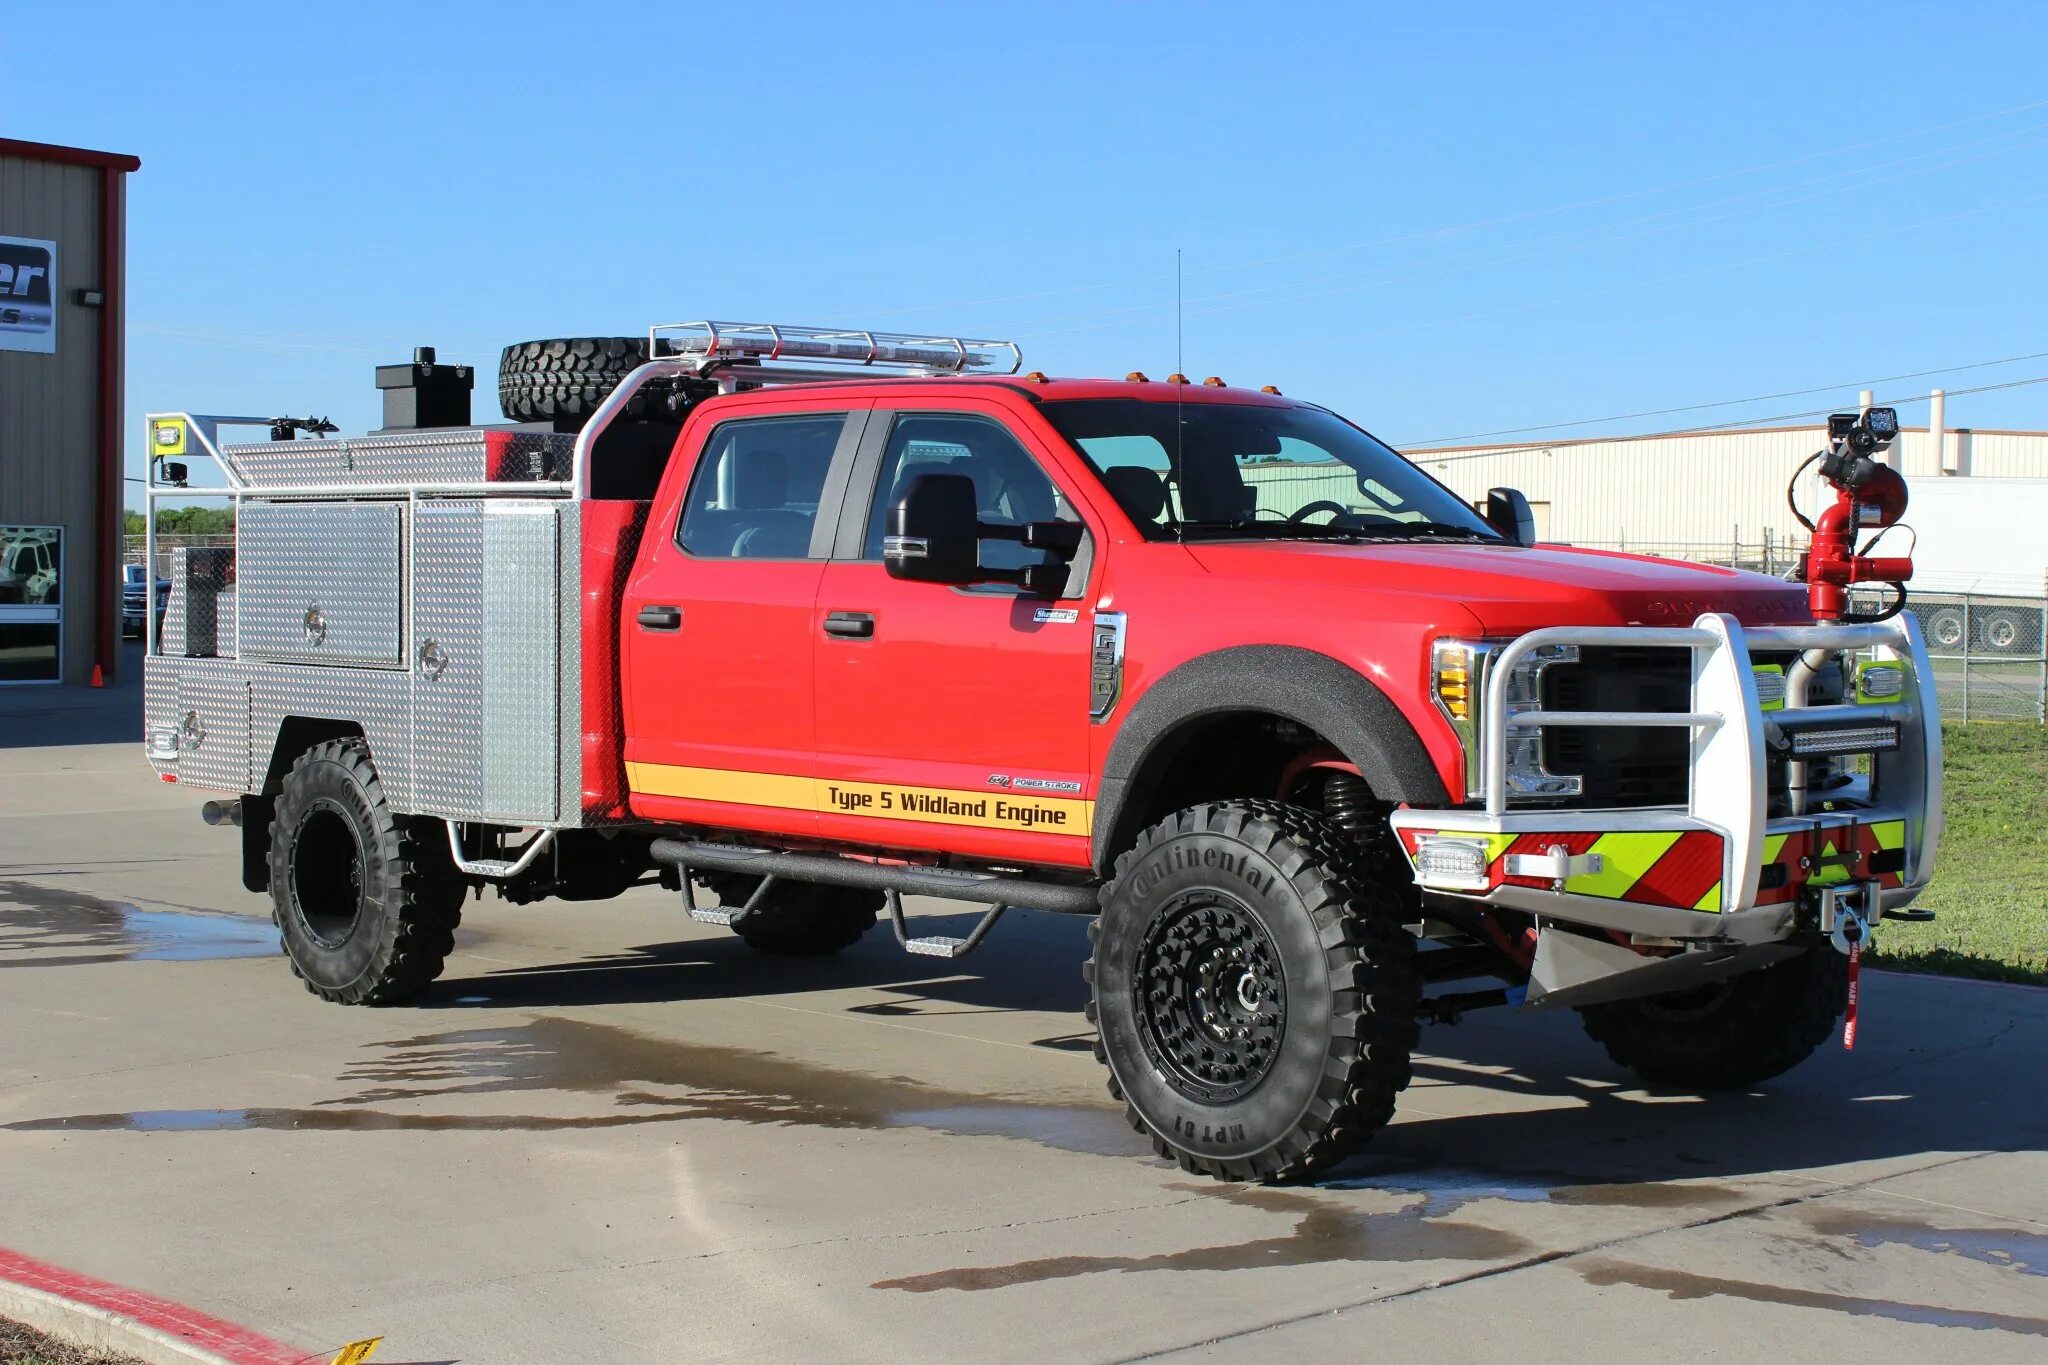 Ford f550 6x6. Ford f550 6*6. Ford f-550 6x6 Monster Truck. Ford f550 National Tropical.